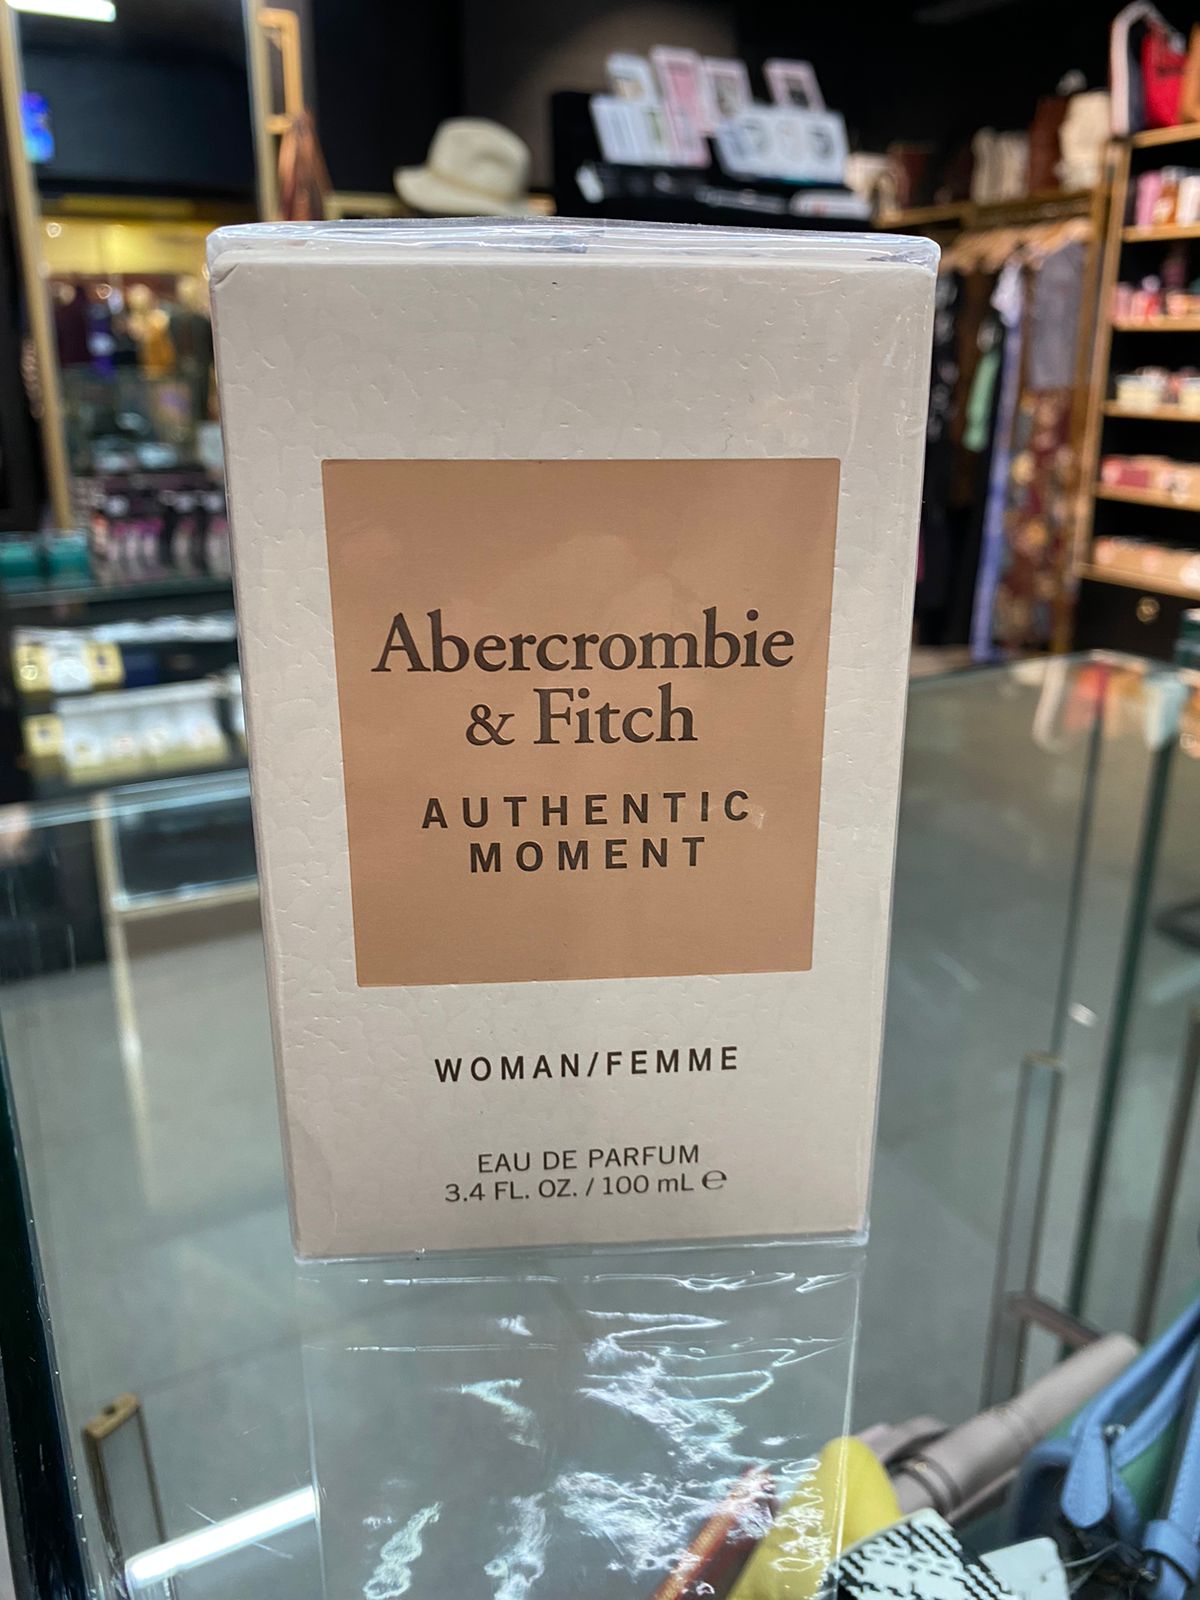 Abercrombie & Fitch  (AUTHENTIC MOVEMENT)